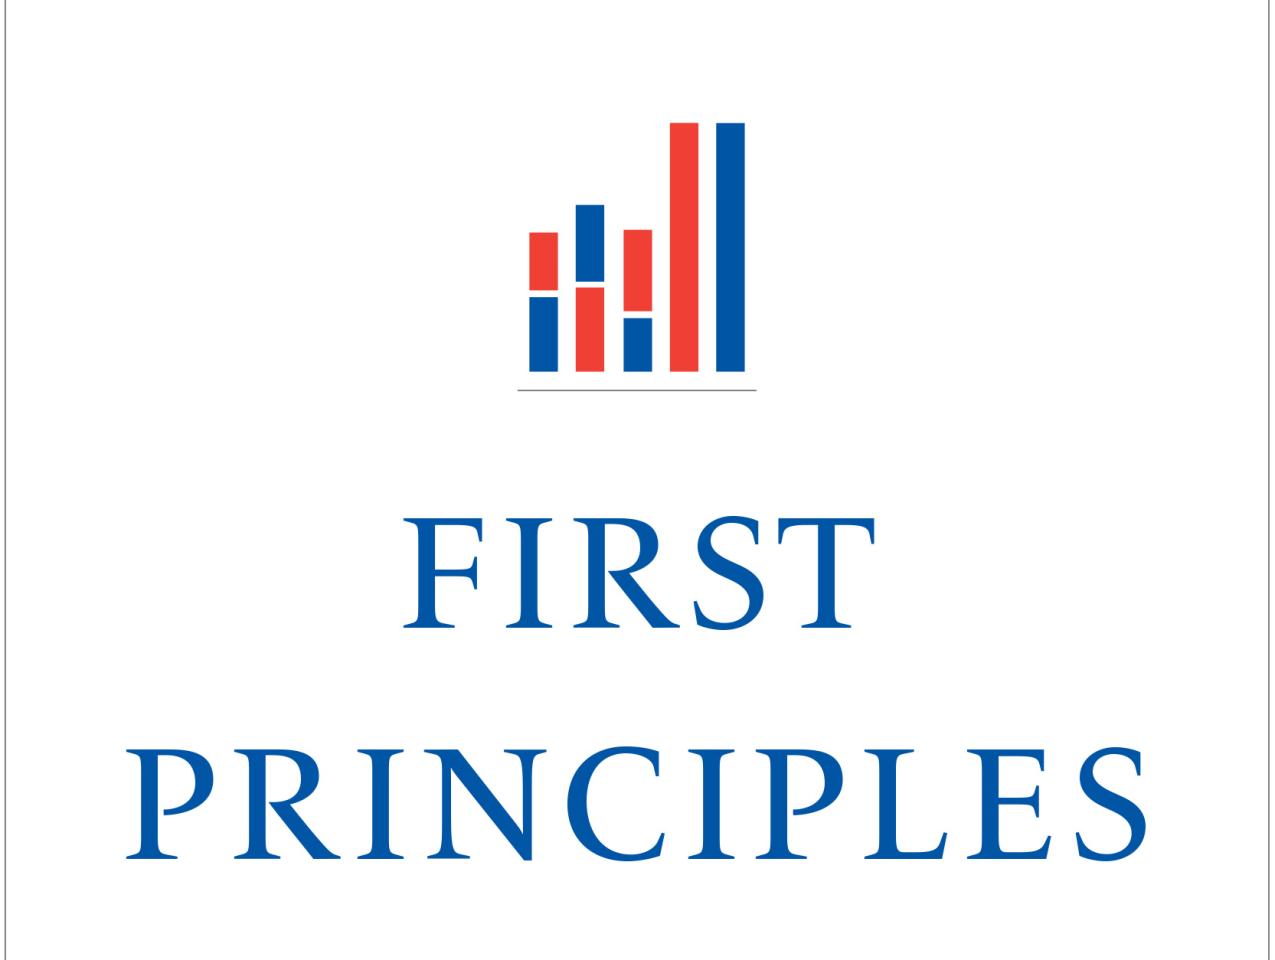 First Principles Book Cover